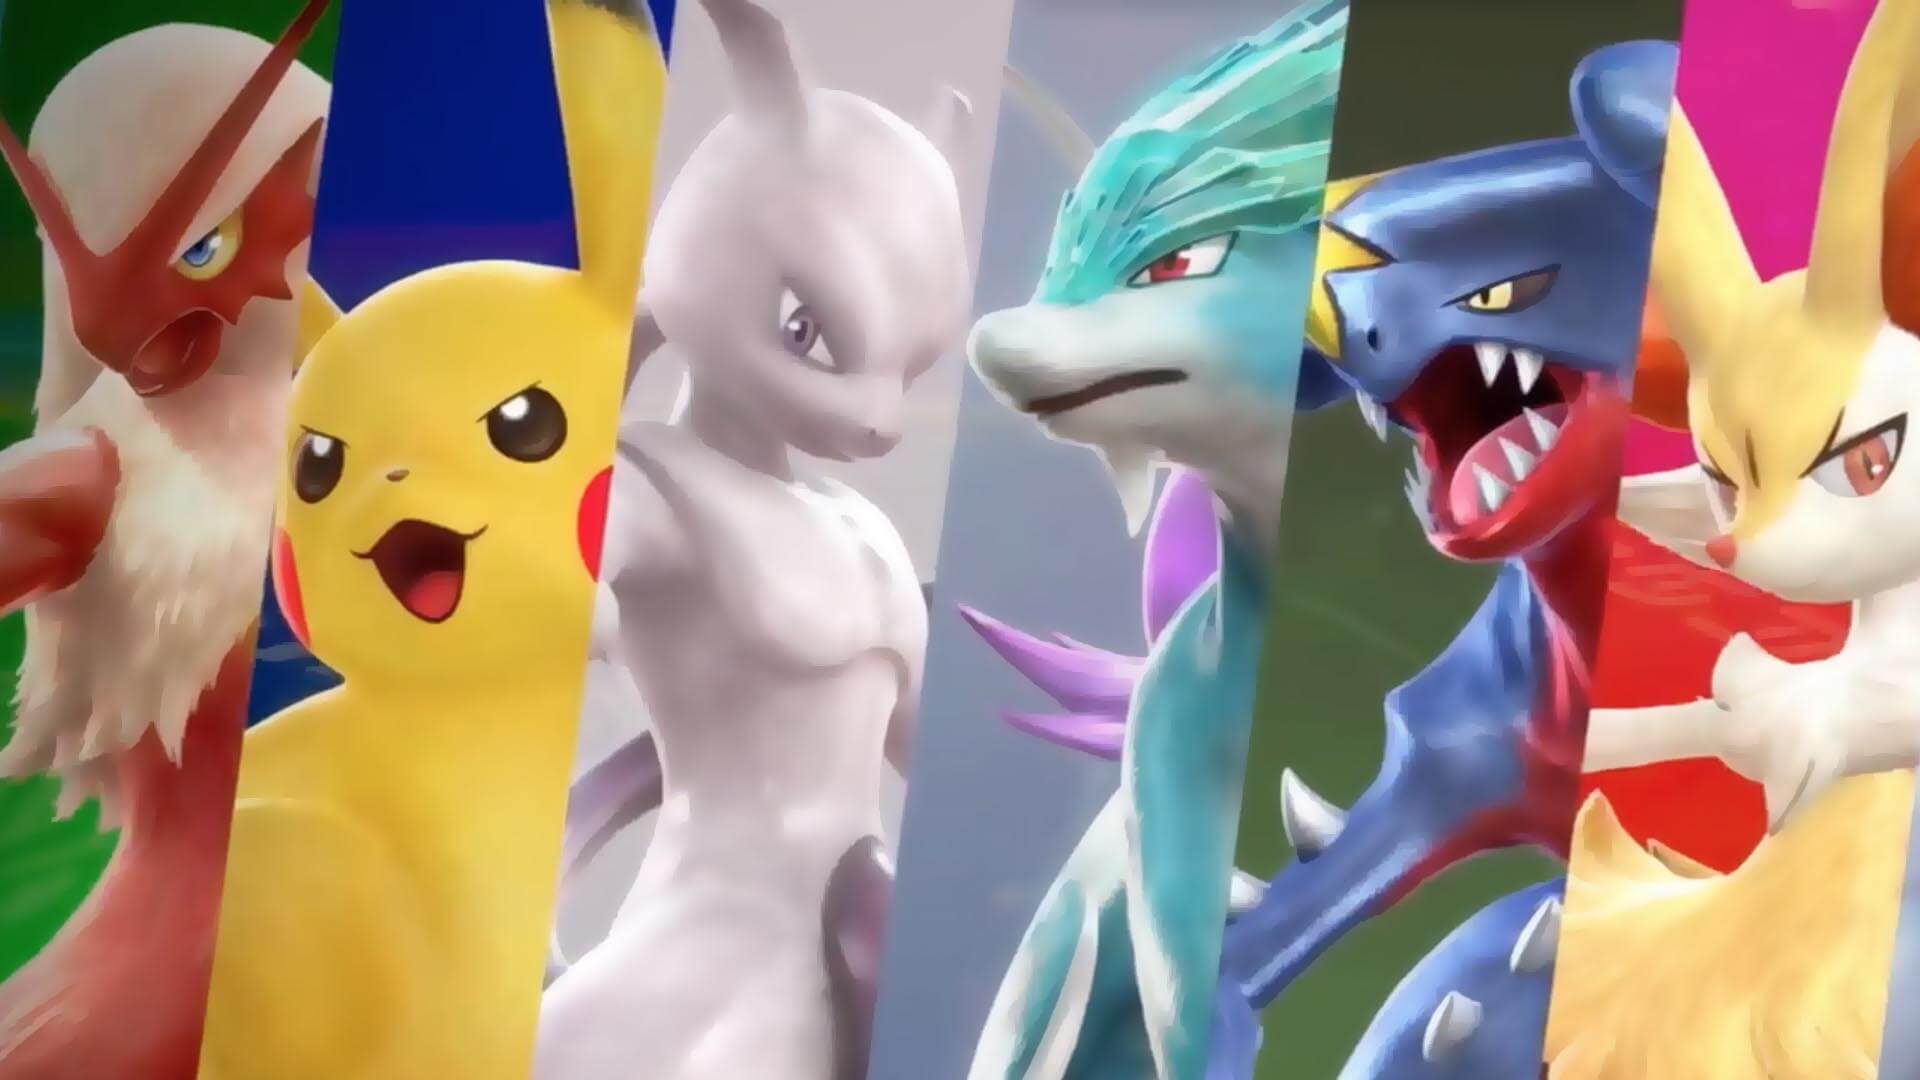 Tekken's producer urged to continue the Pokémon fighting franchise